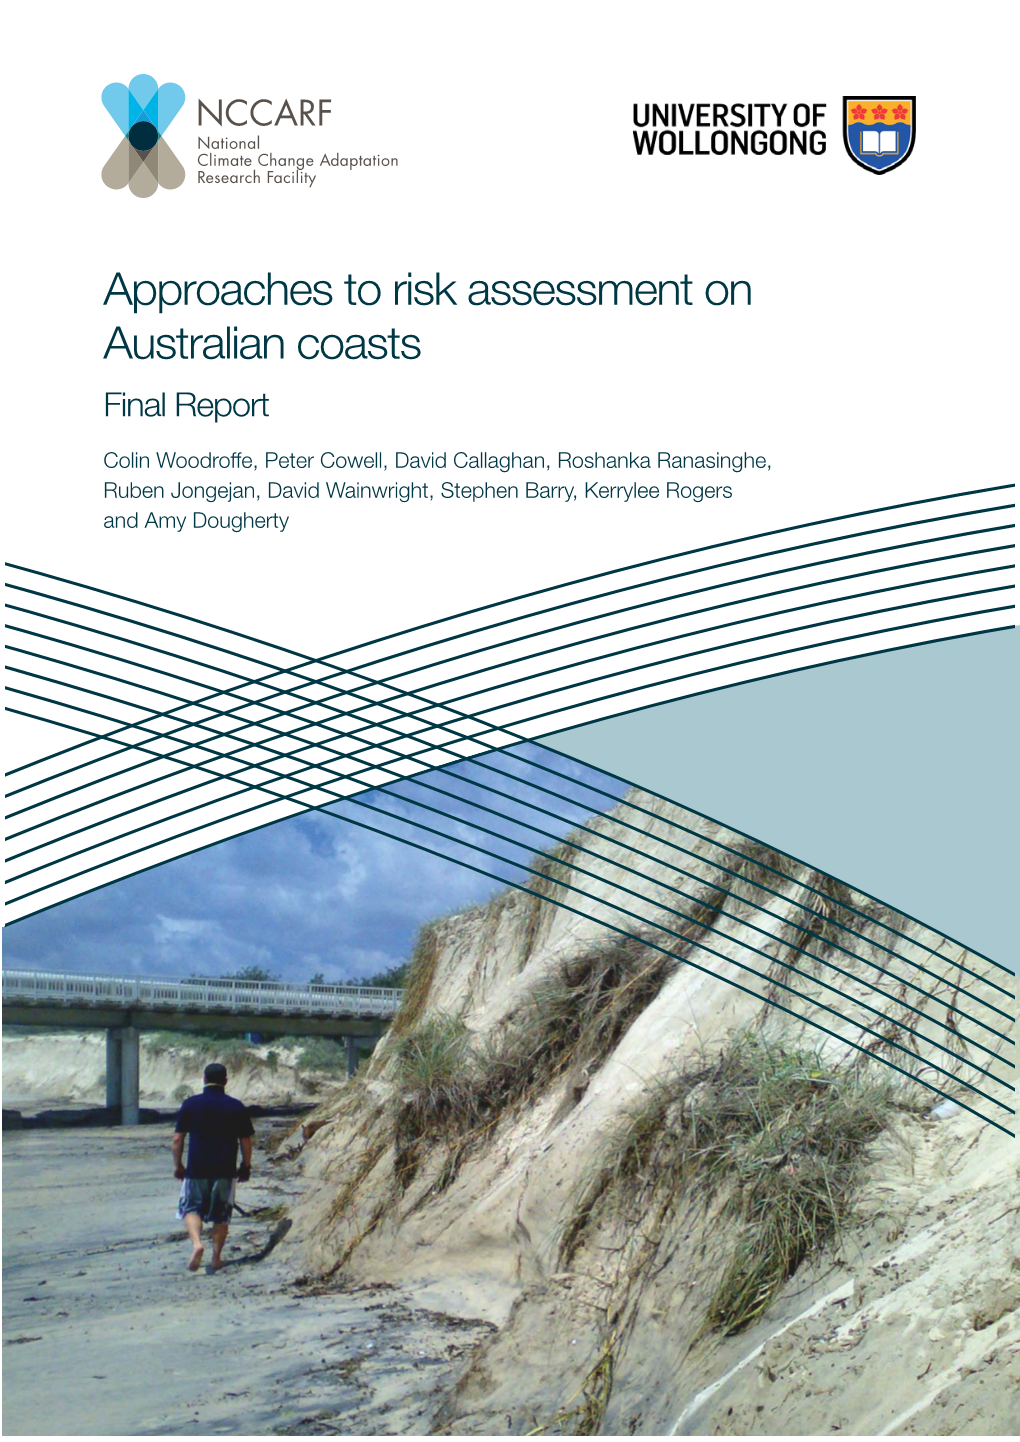 Approaches to Risk Assessment on Australian Coasts